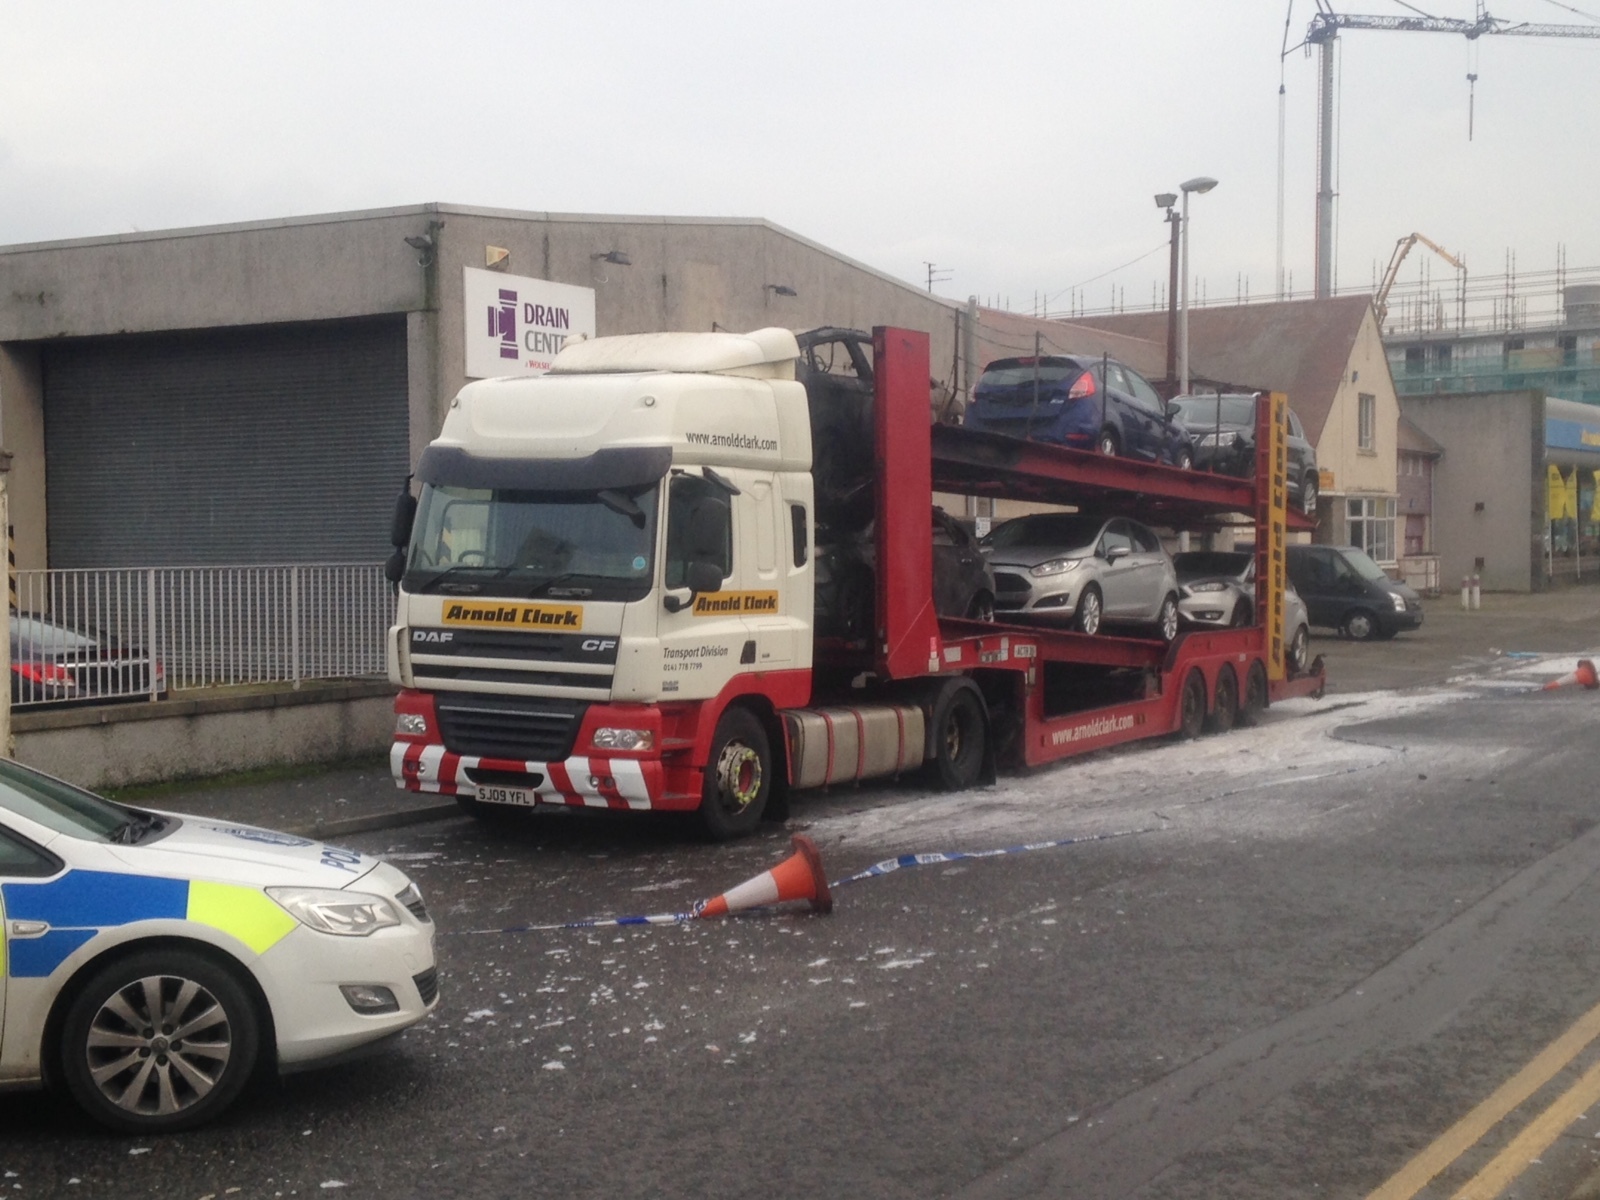 The car transporter and vehicles it was carrying were left badly damaged